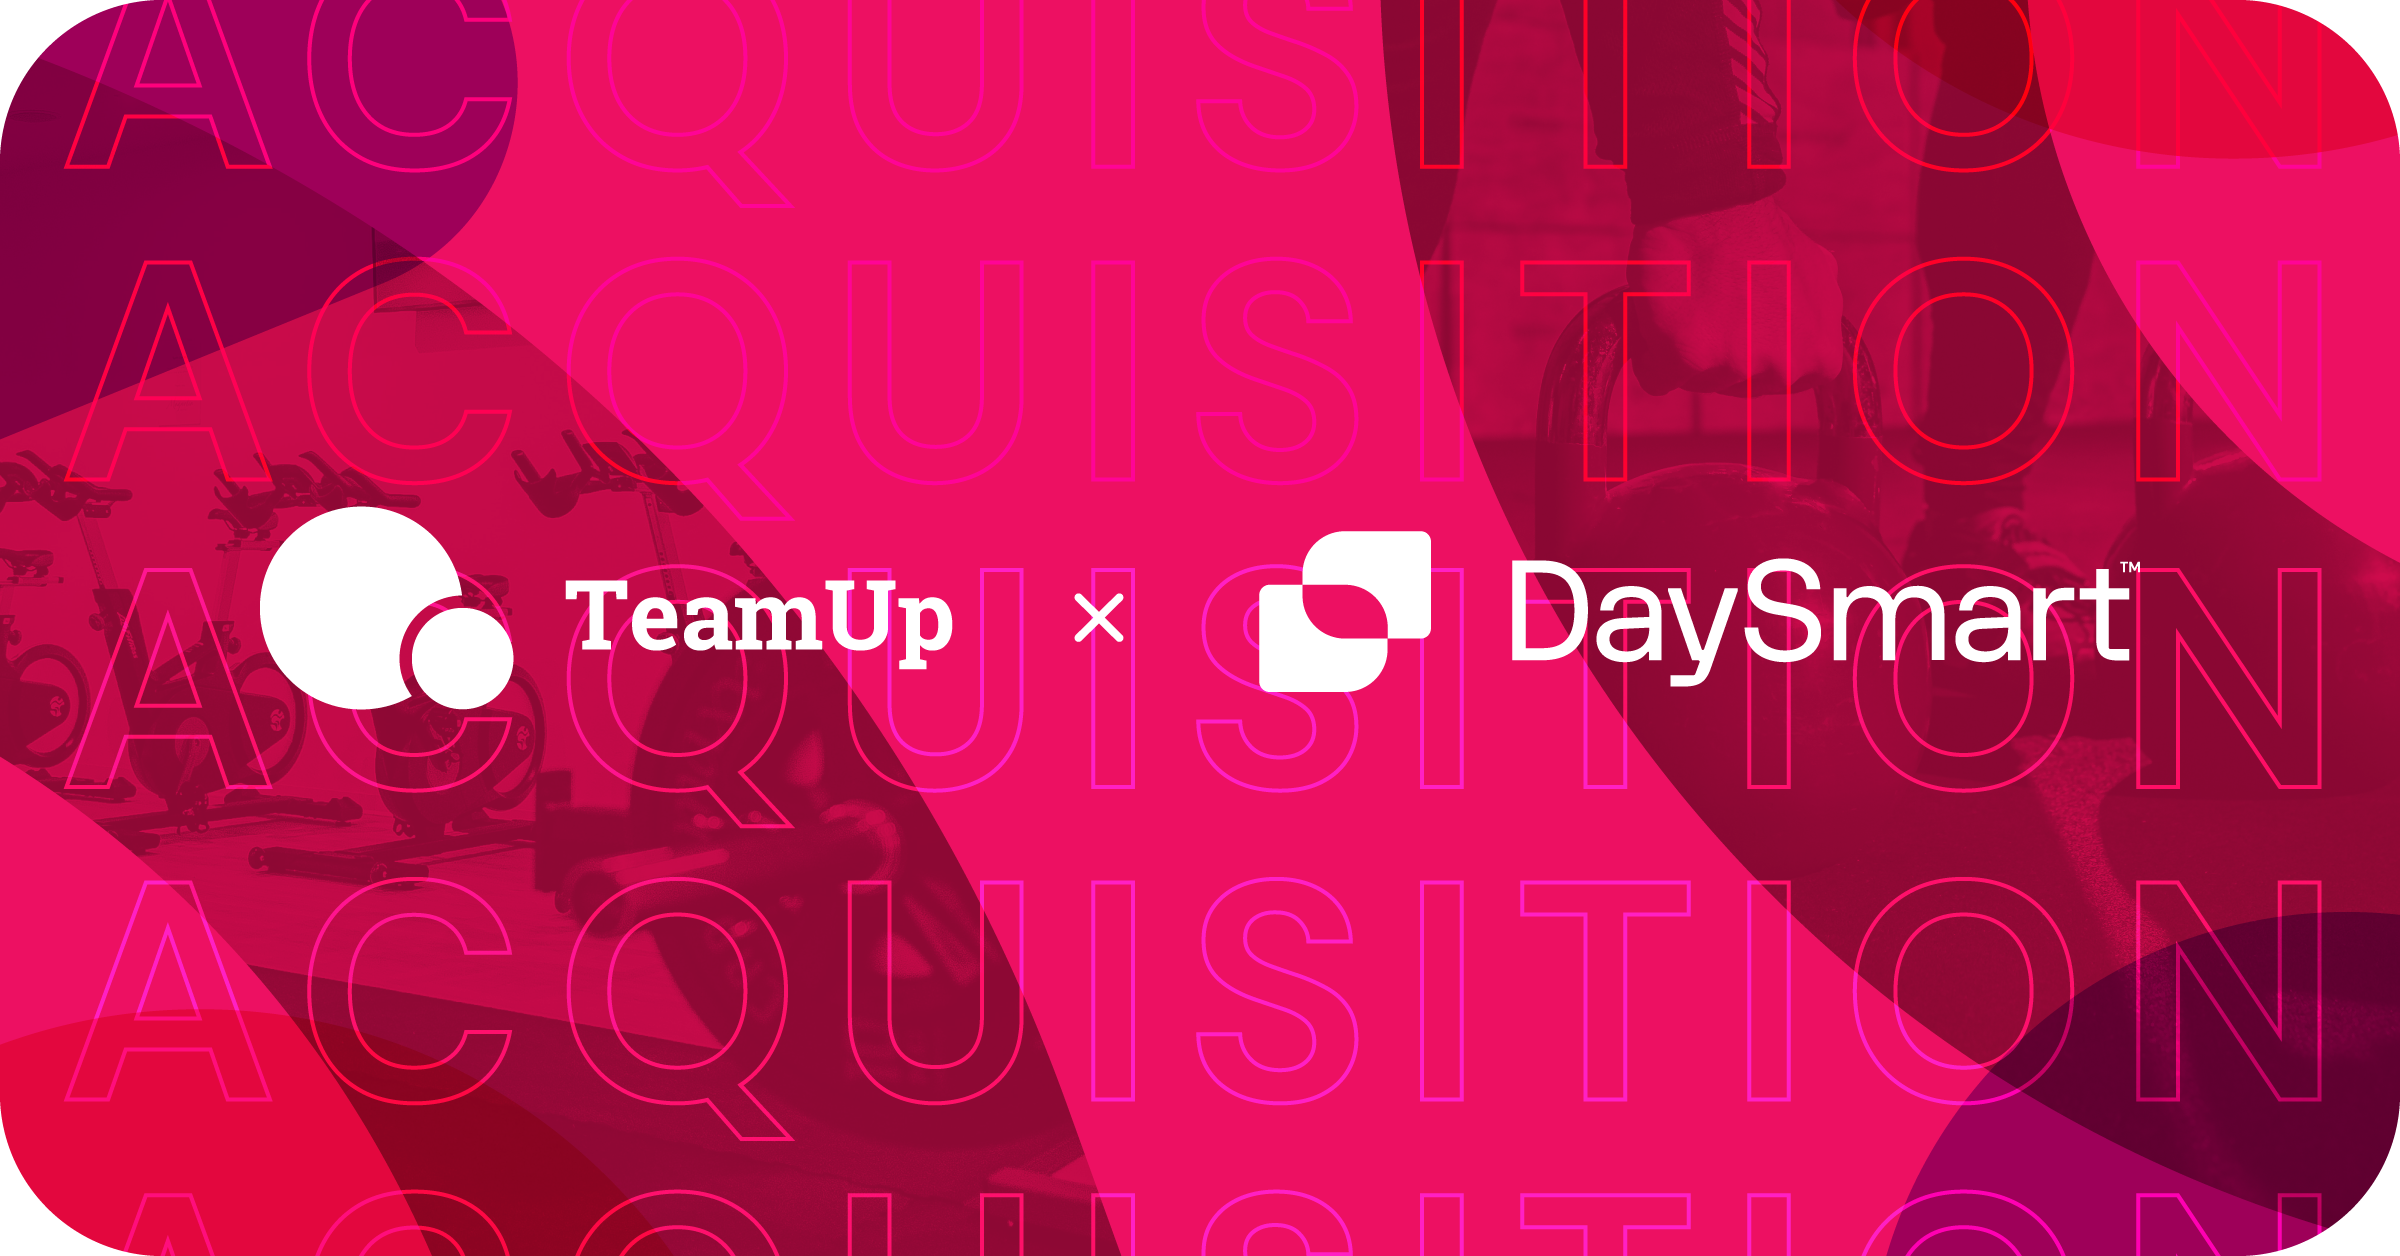 Featured image for DaySmart Acquires TeamUp post